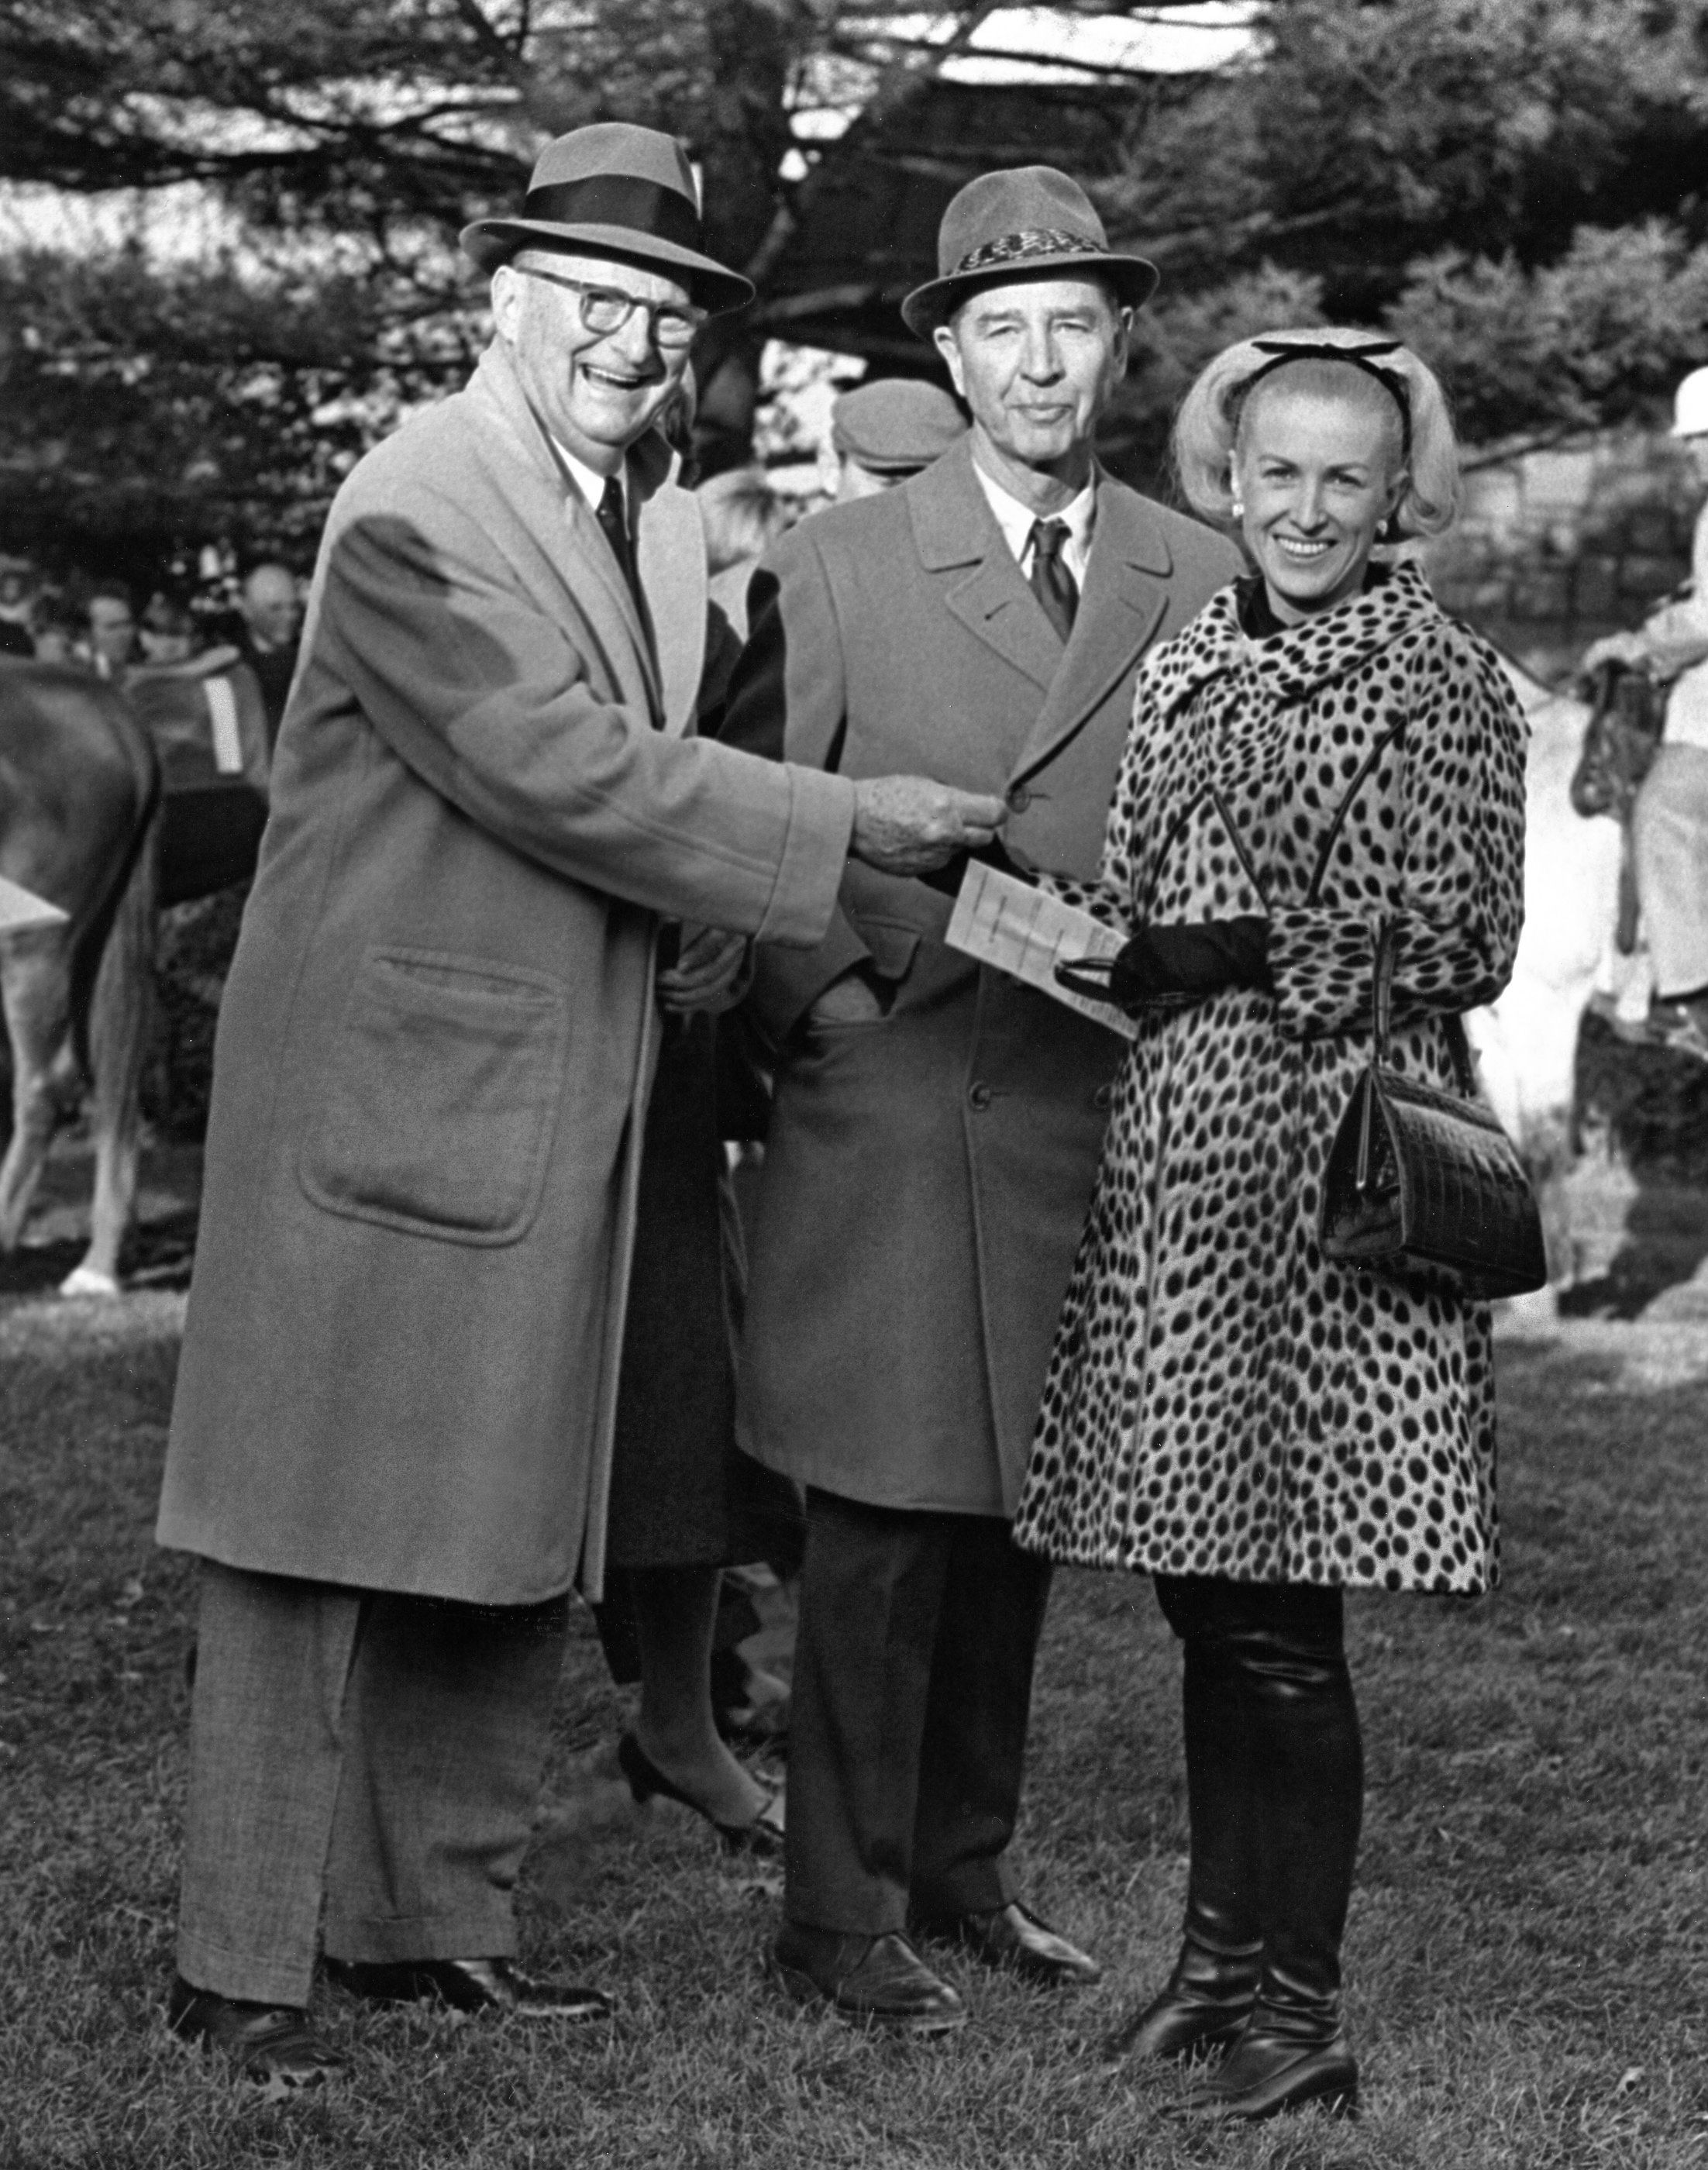 From left. Leslie Combs, C. V. Whitney, and Marylou Whitney (Keeneland Association)